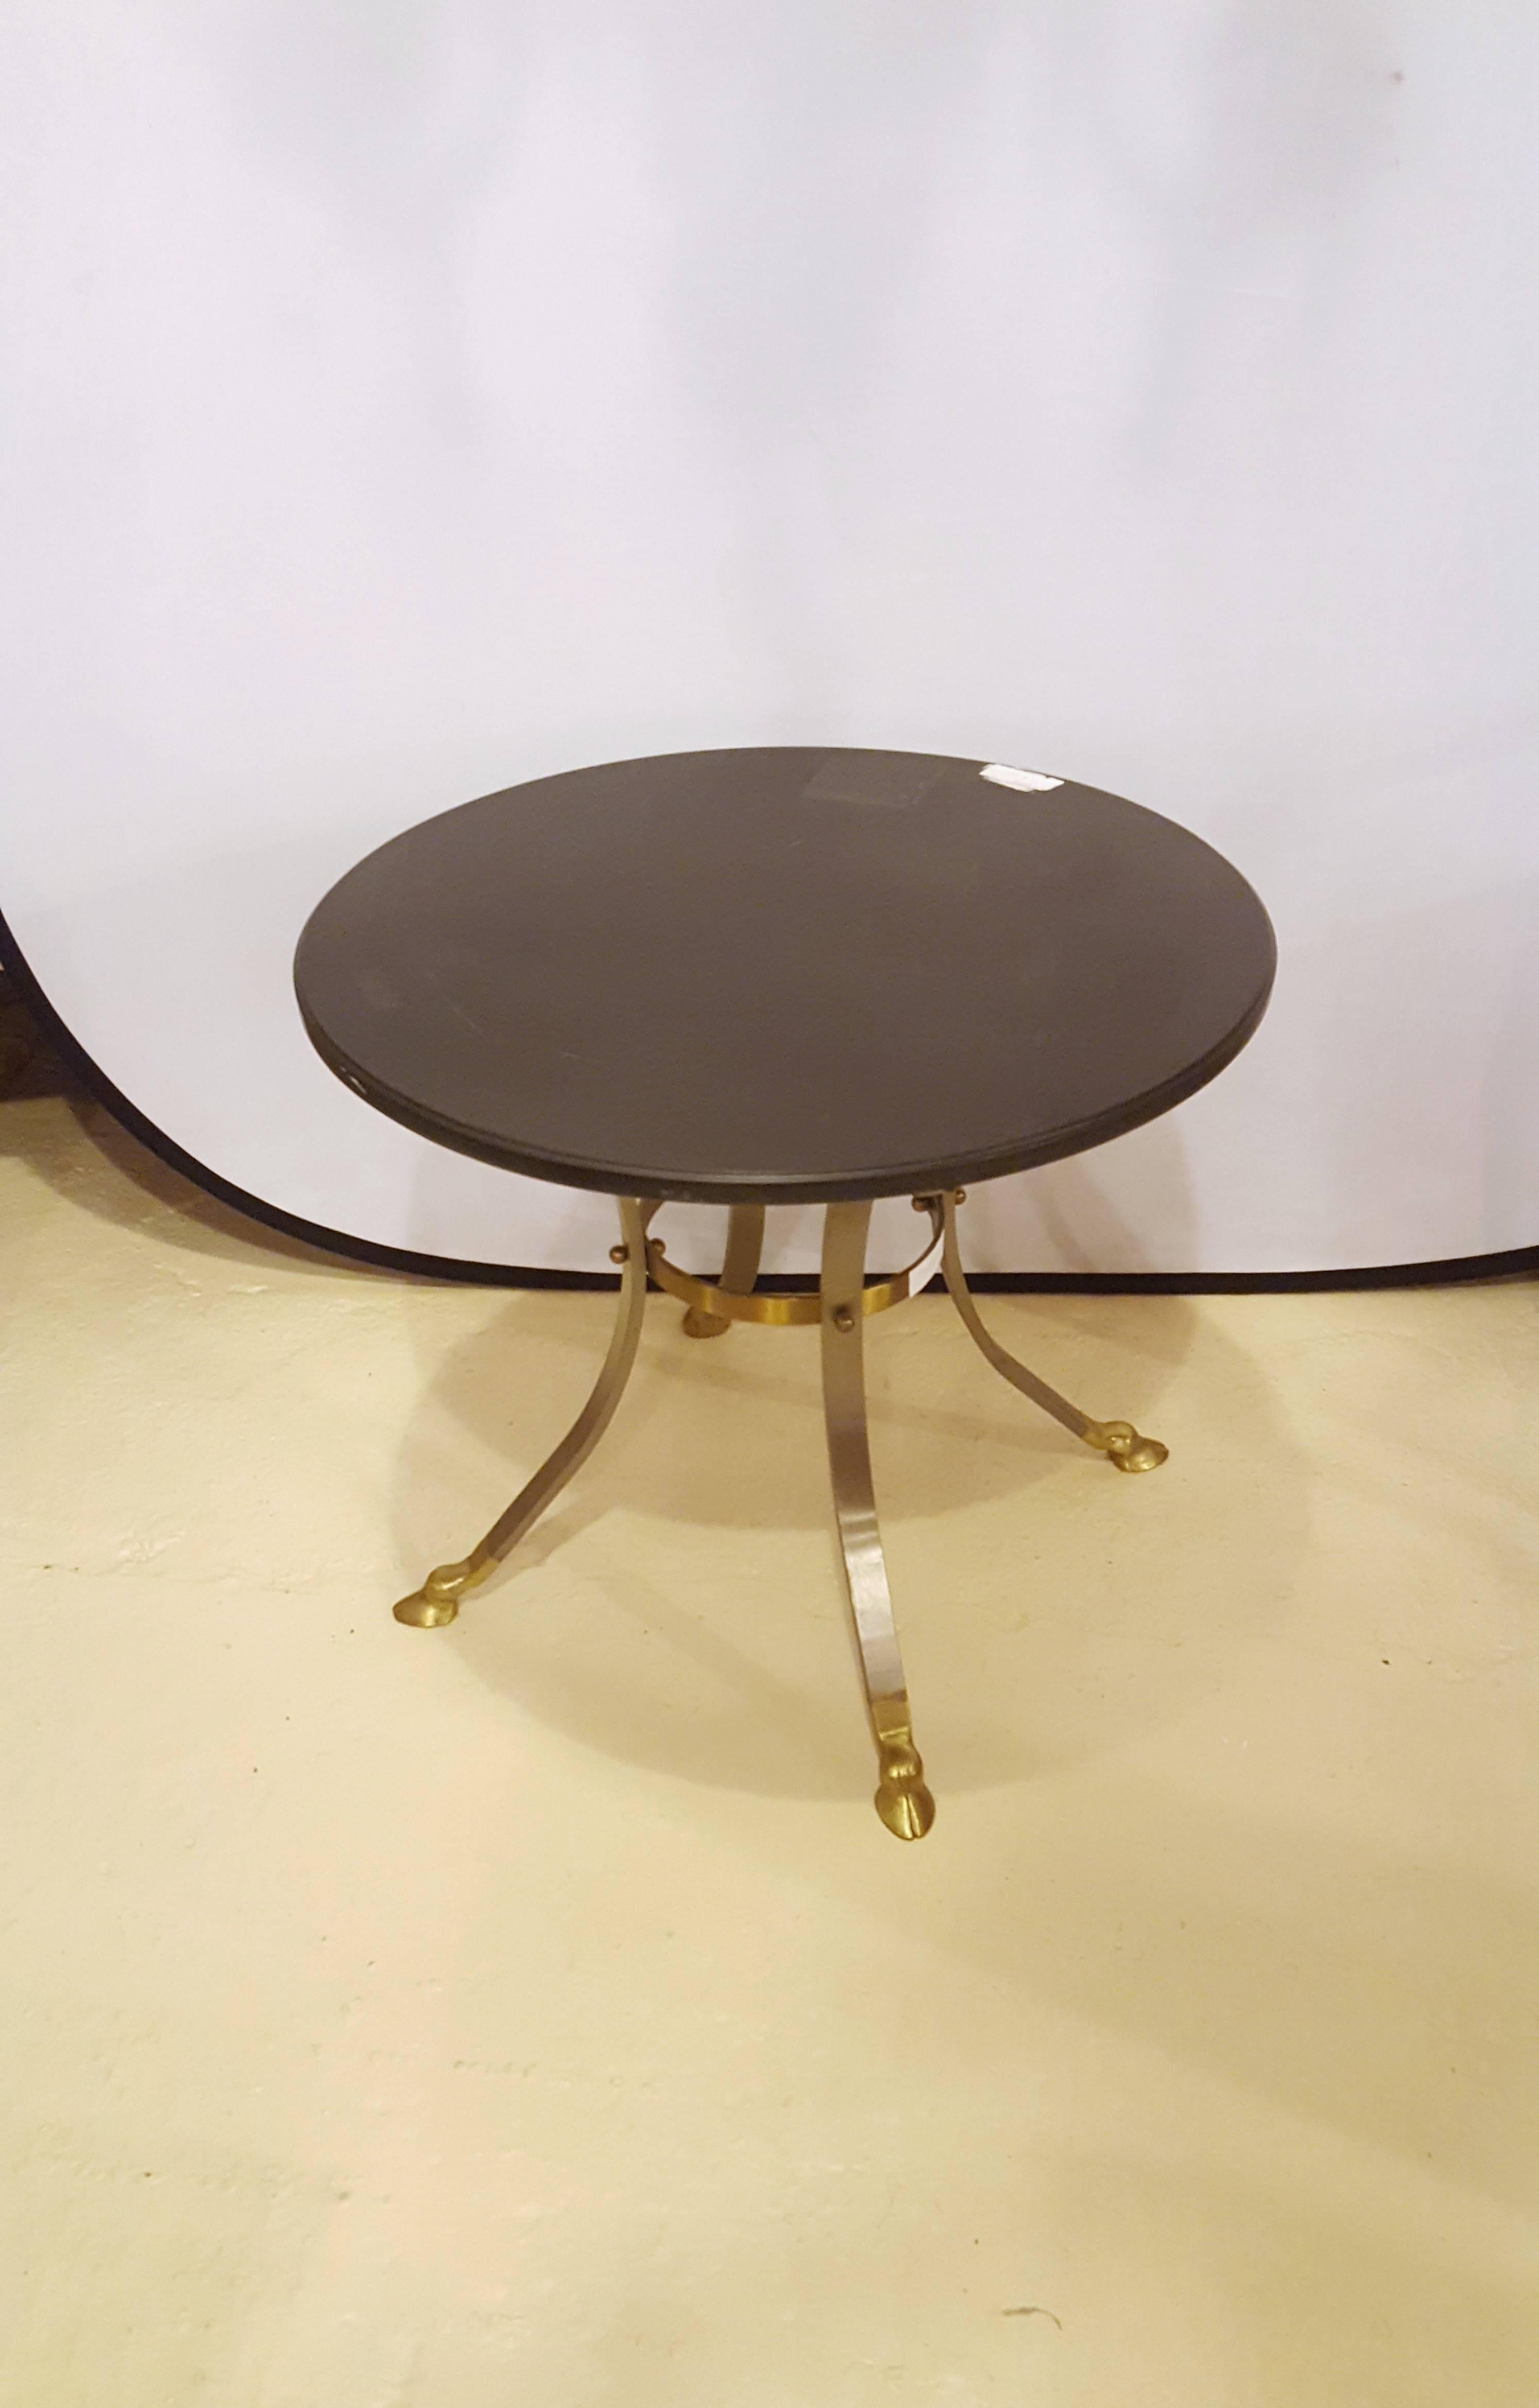 Hollywood Regency Brass and Steel Ebony Marble Top Gueridon Table / End Table Attibuted to Jansen